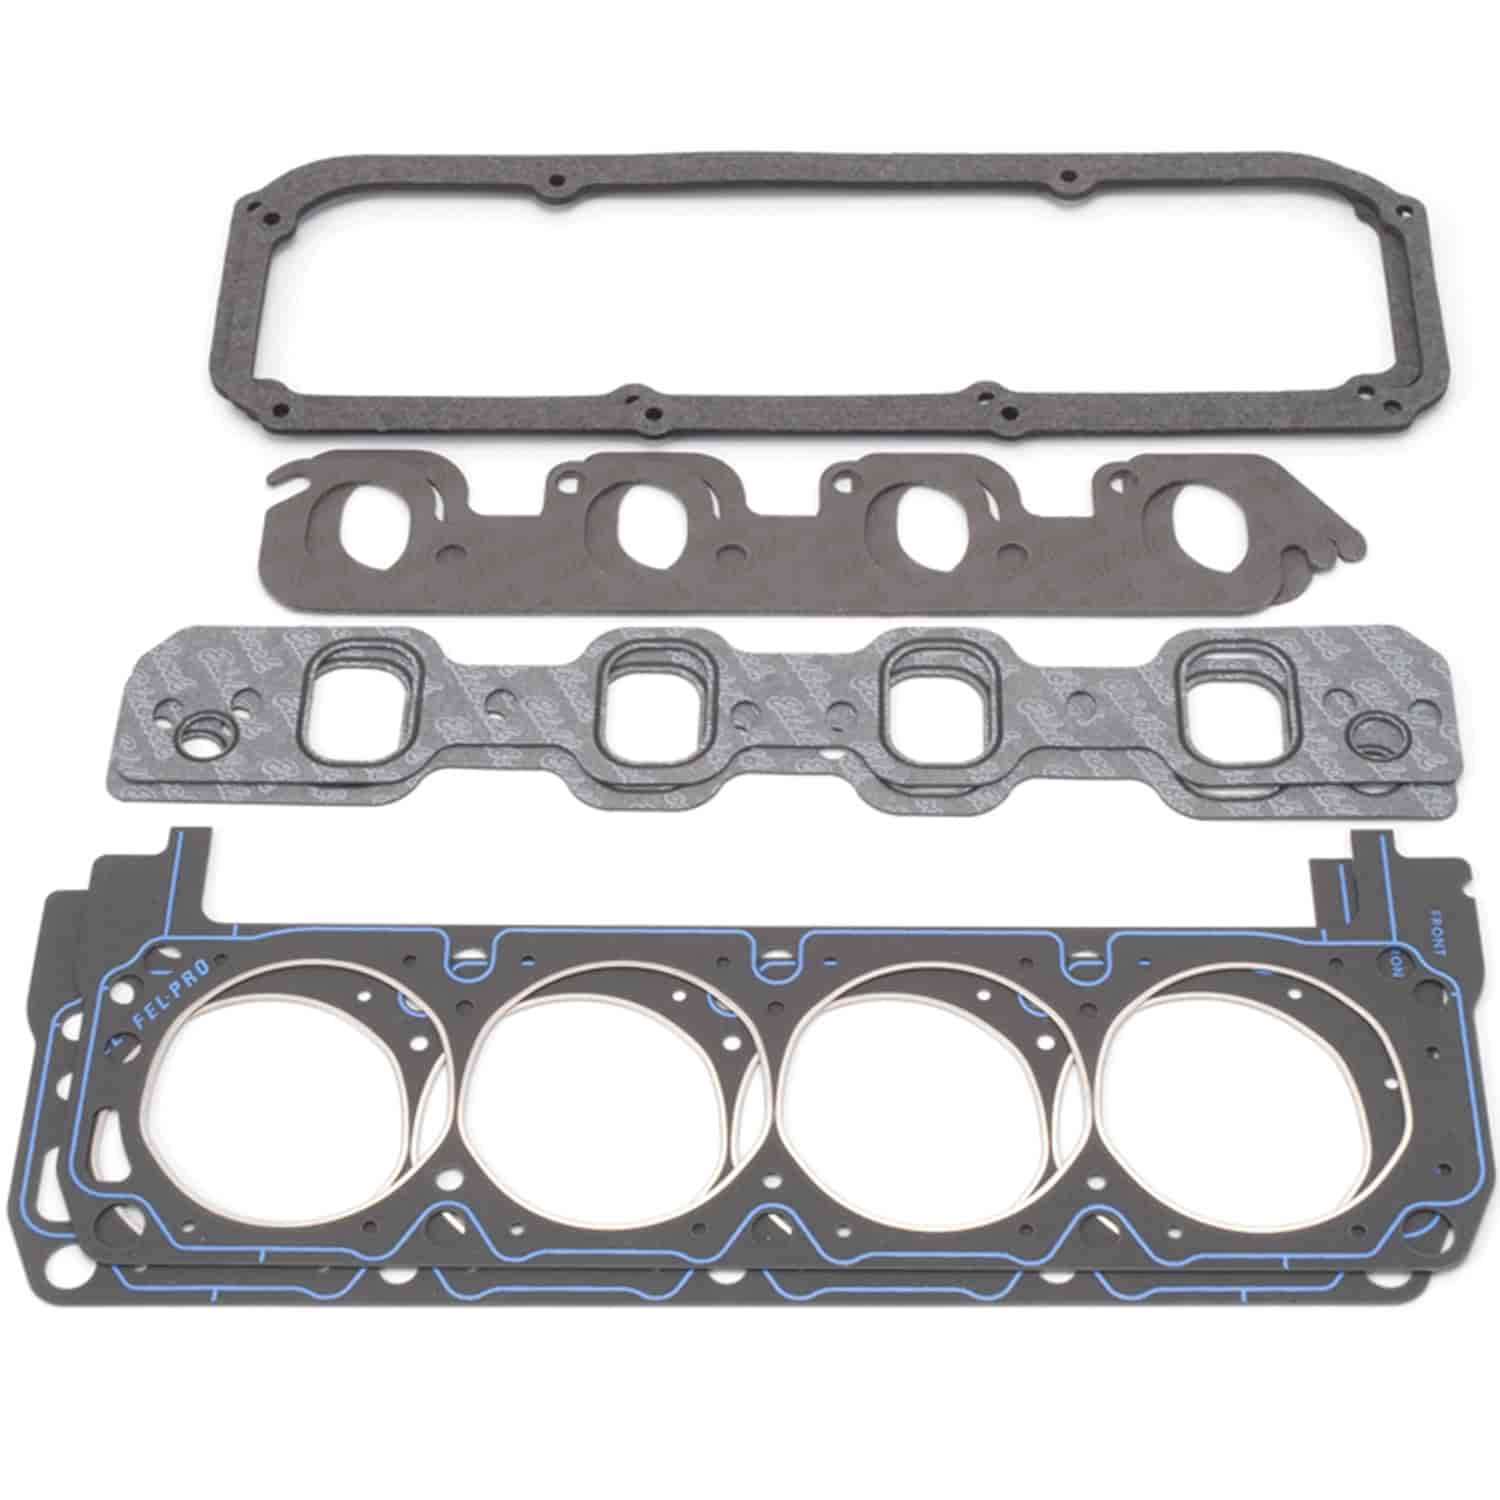 Complete Head Gasket Set for Small Block Ford 302/351W with E-Boss/Clevor Conversion